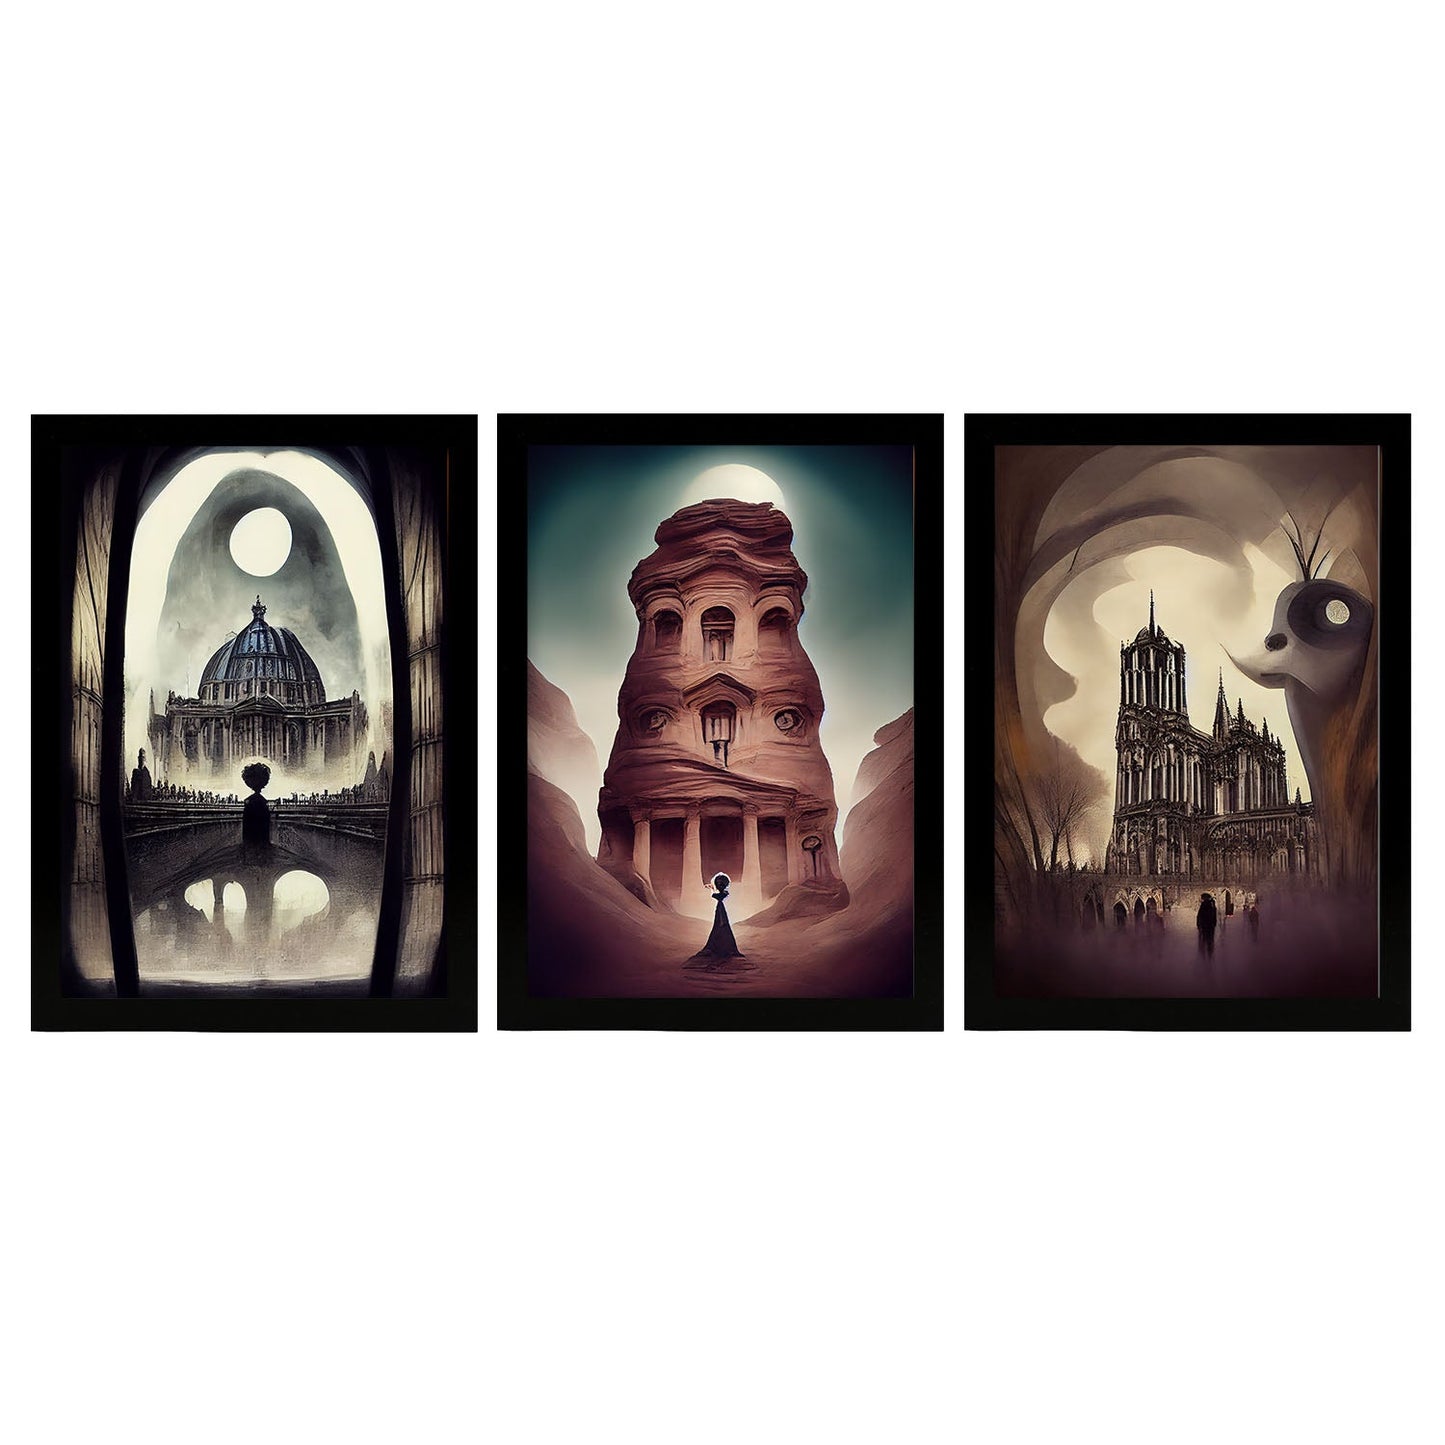 Burton style Illustrations of monuments and cities inspired by Burton's Dark and Goth art Interior Design and Decoration Set Collection 10-Artwork-Nacnic-A4-Sin Marco-Nacnic Estudio SL